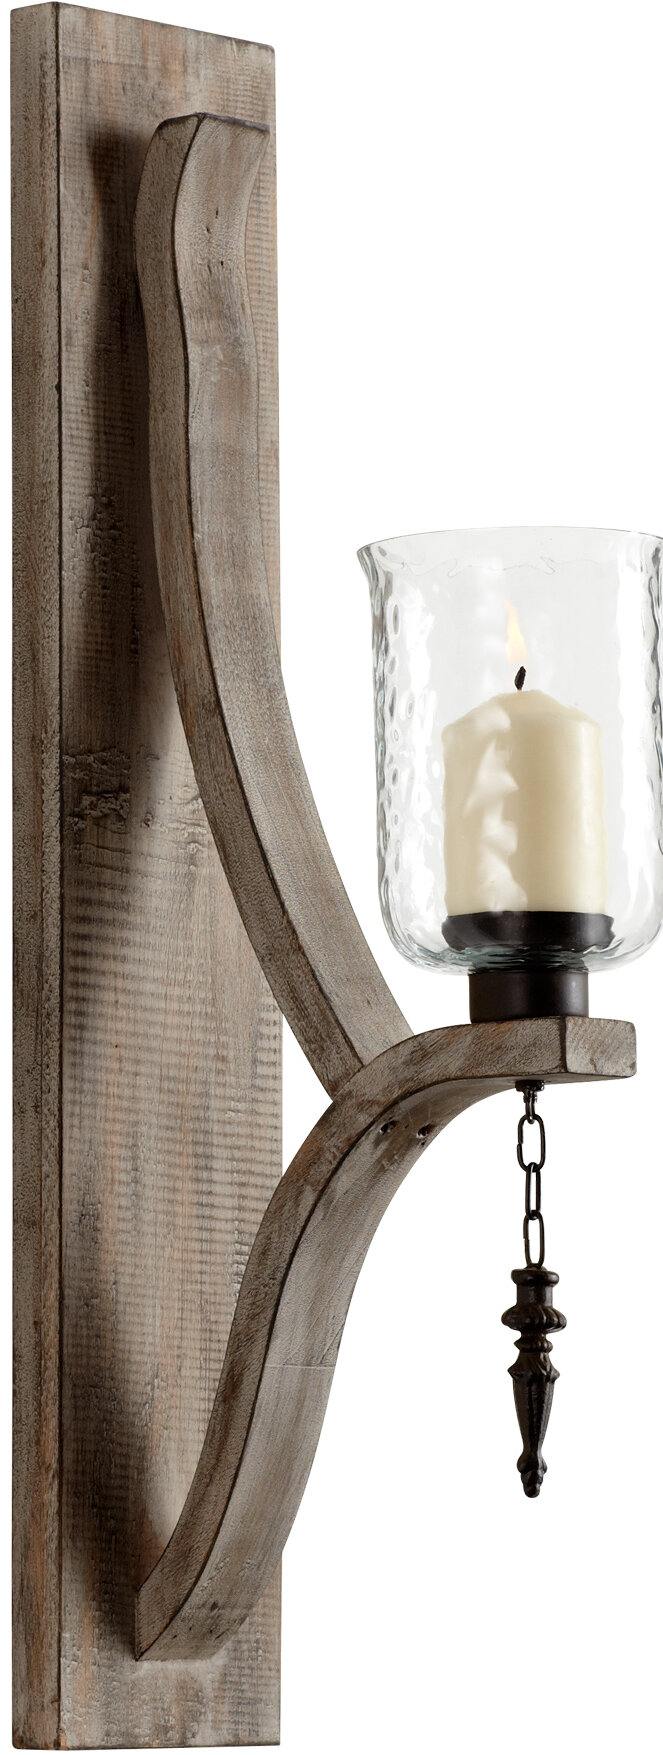 Sconce Wood Candle Holders You Ll Love In 2021 Wayfair